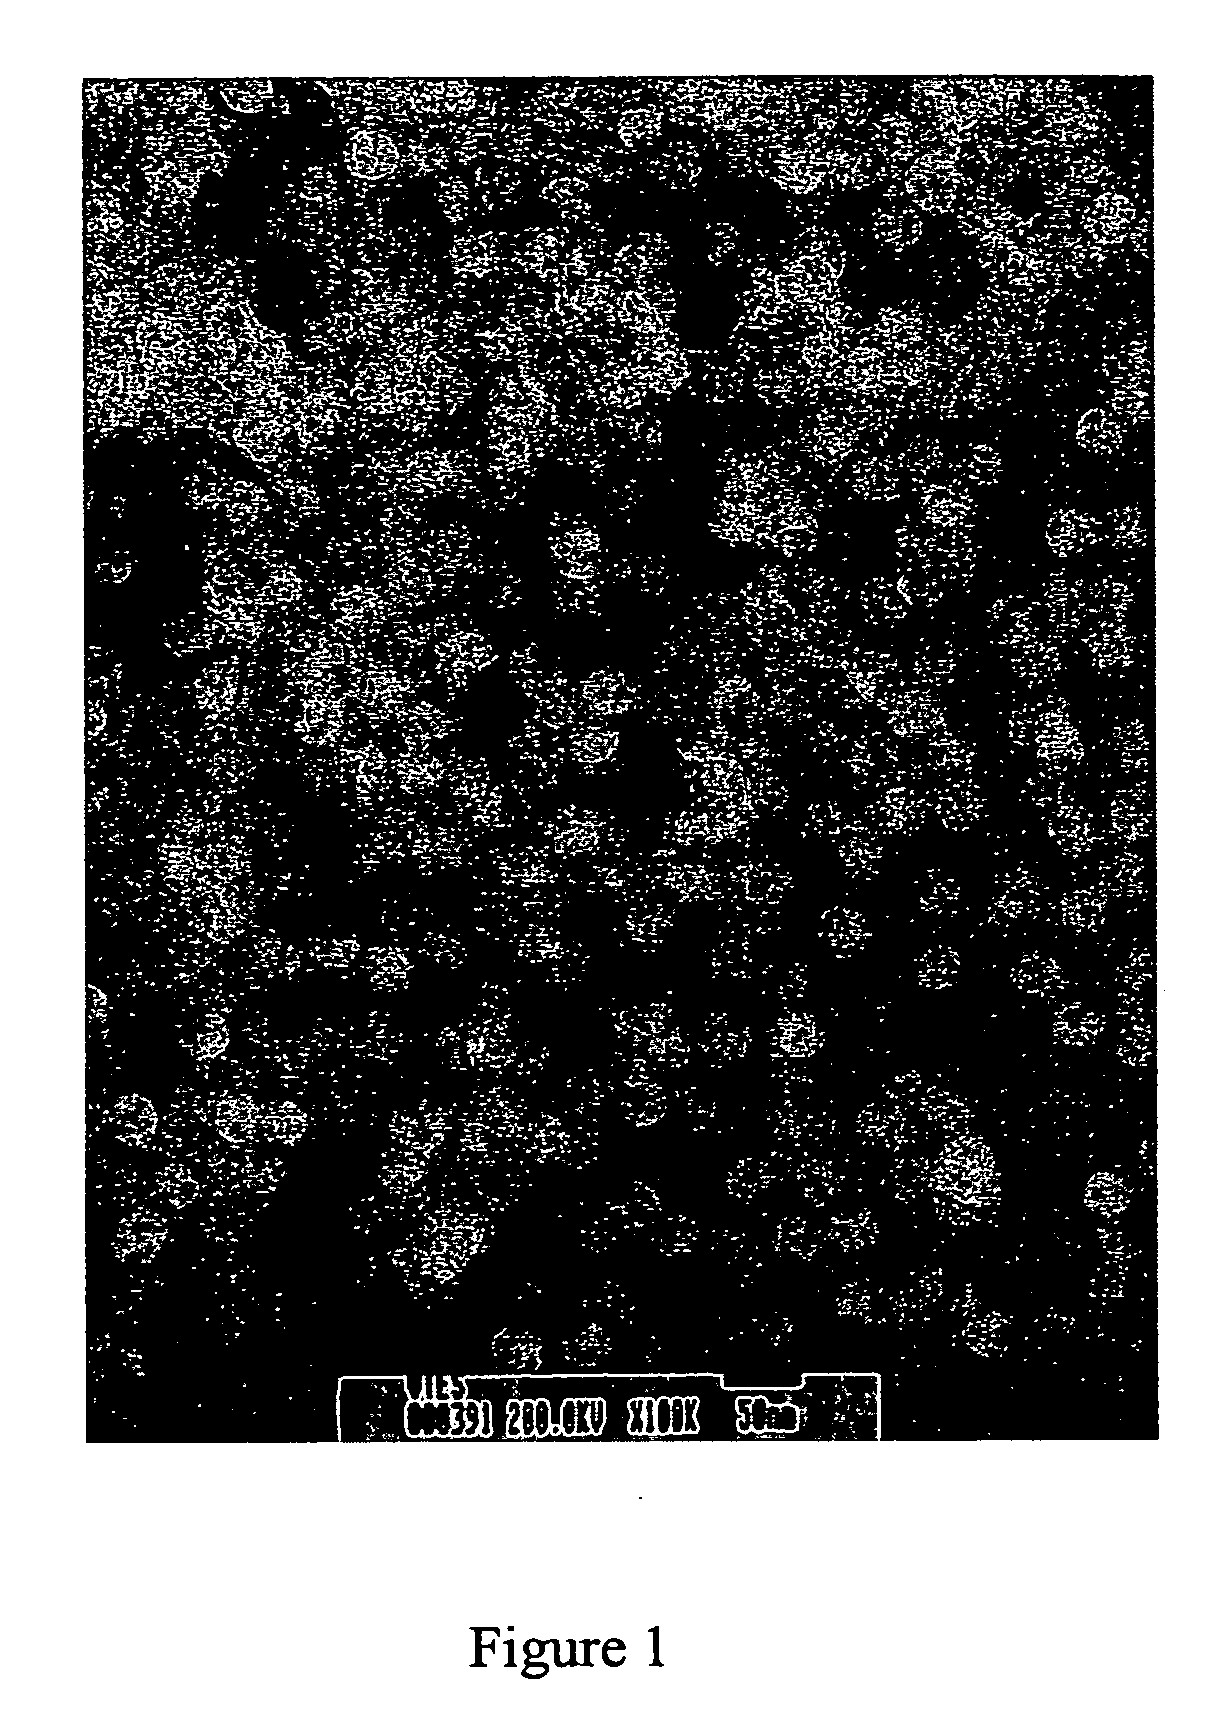 Ceramic based nanoparticles for entrapping therapeutic agents for photodynamic therapy and method of using same